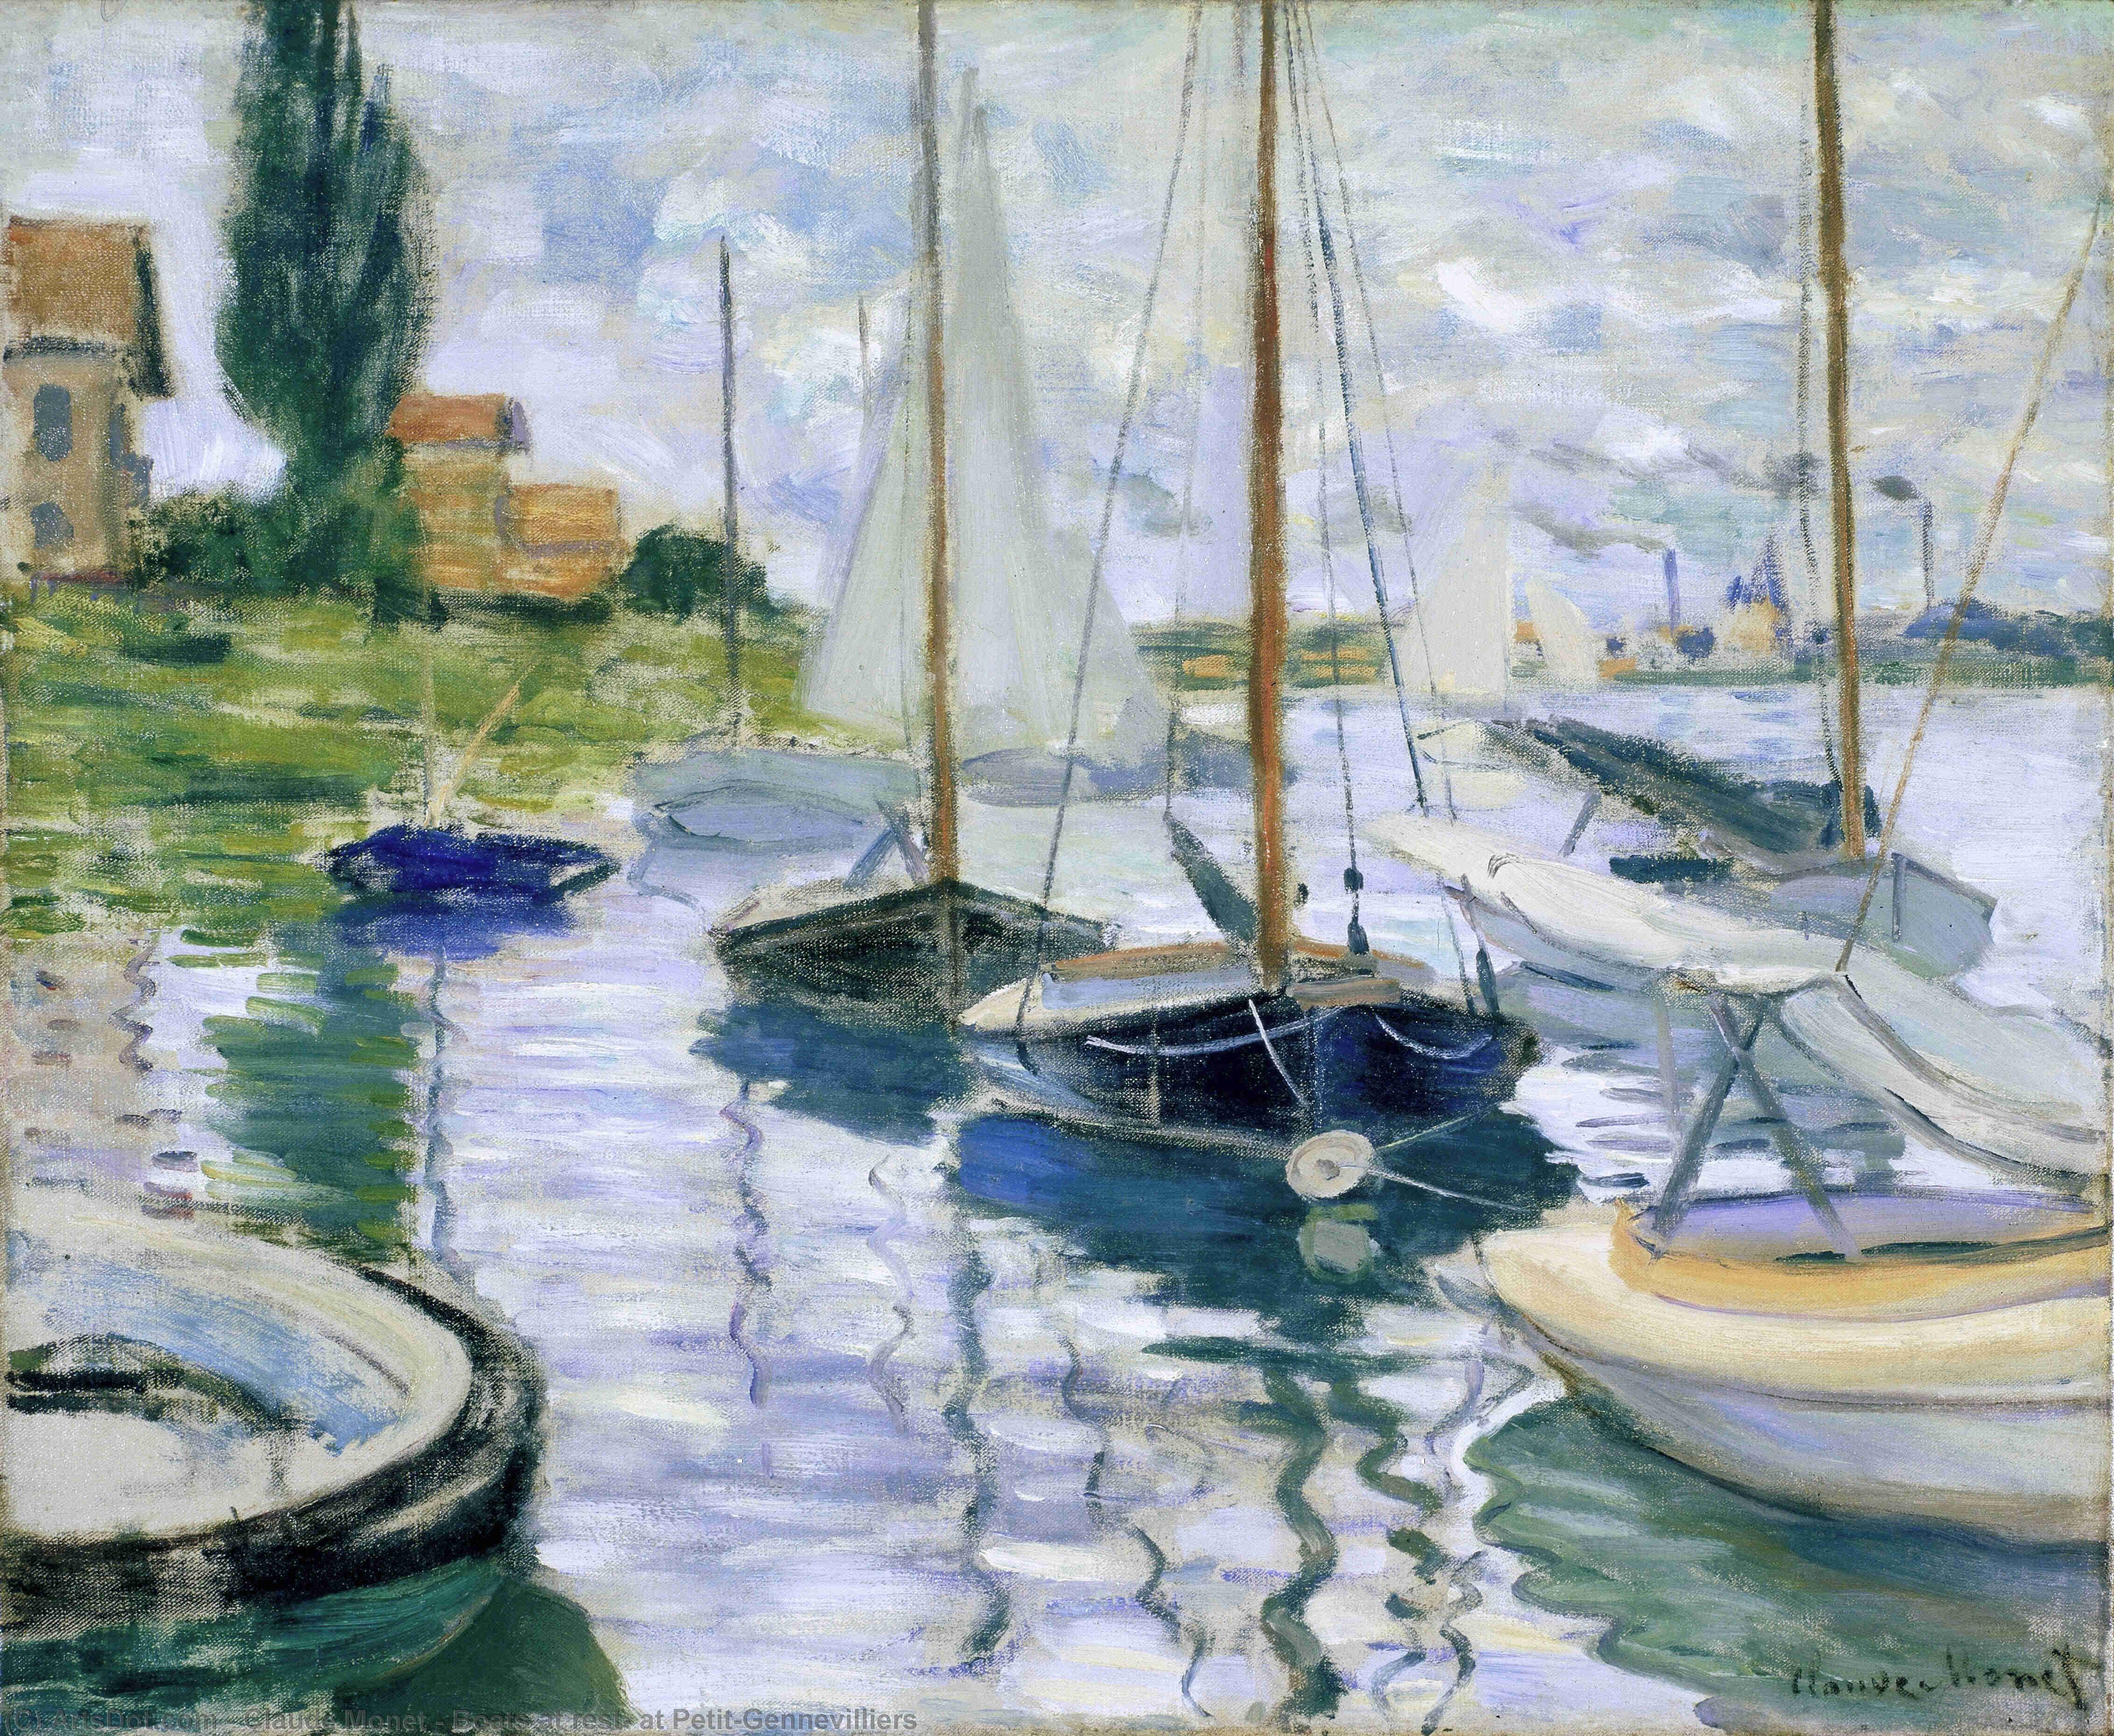 WikiOO.org – 美術百科全書 - 繪畫，作品 Claude Monet - Boats at rest ,  at Petit-Gennevilliers